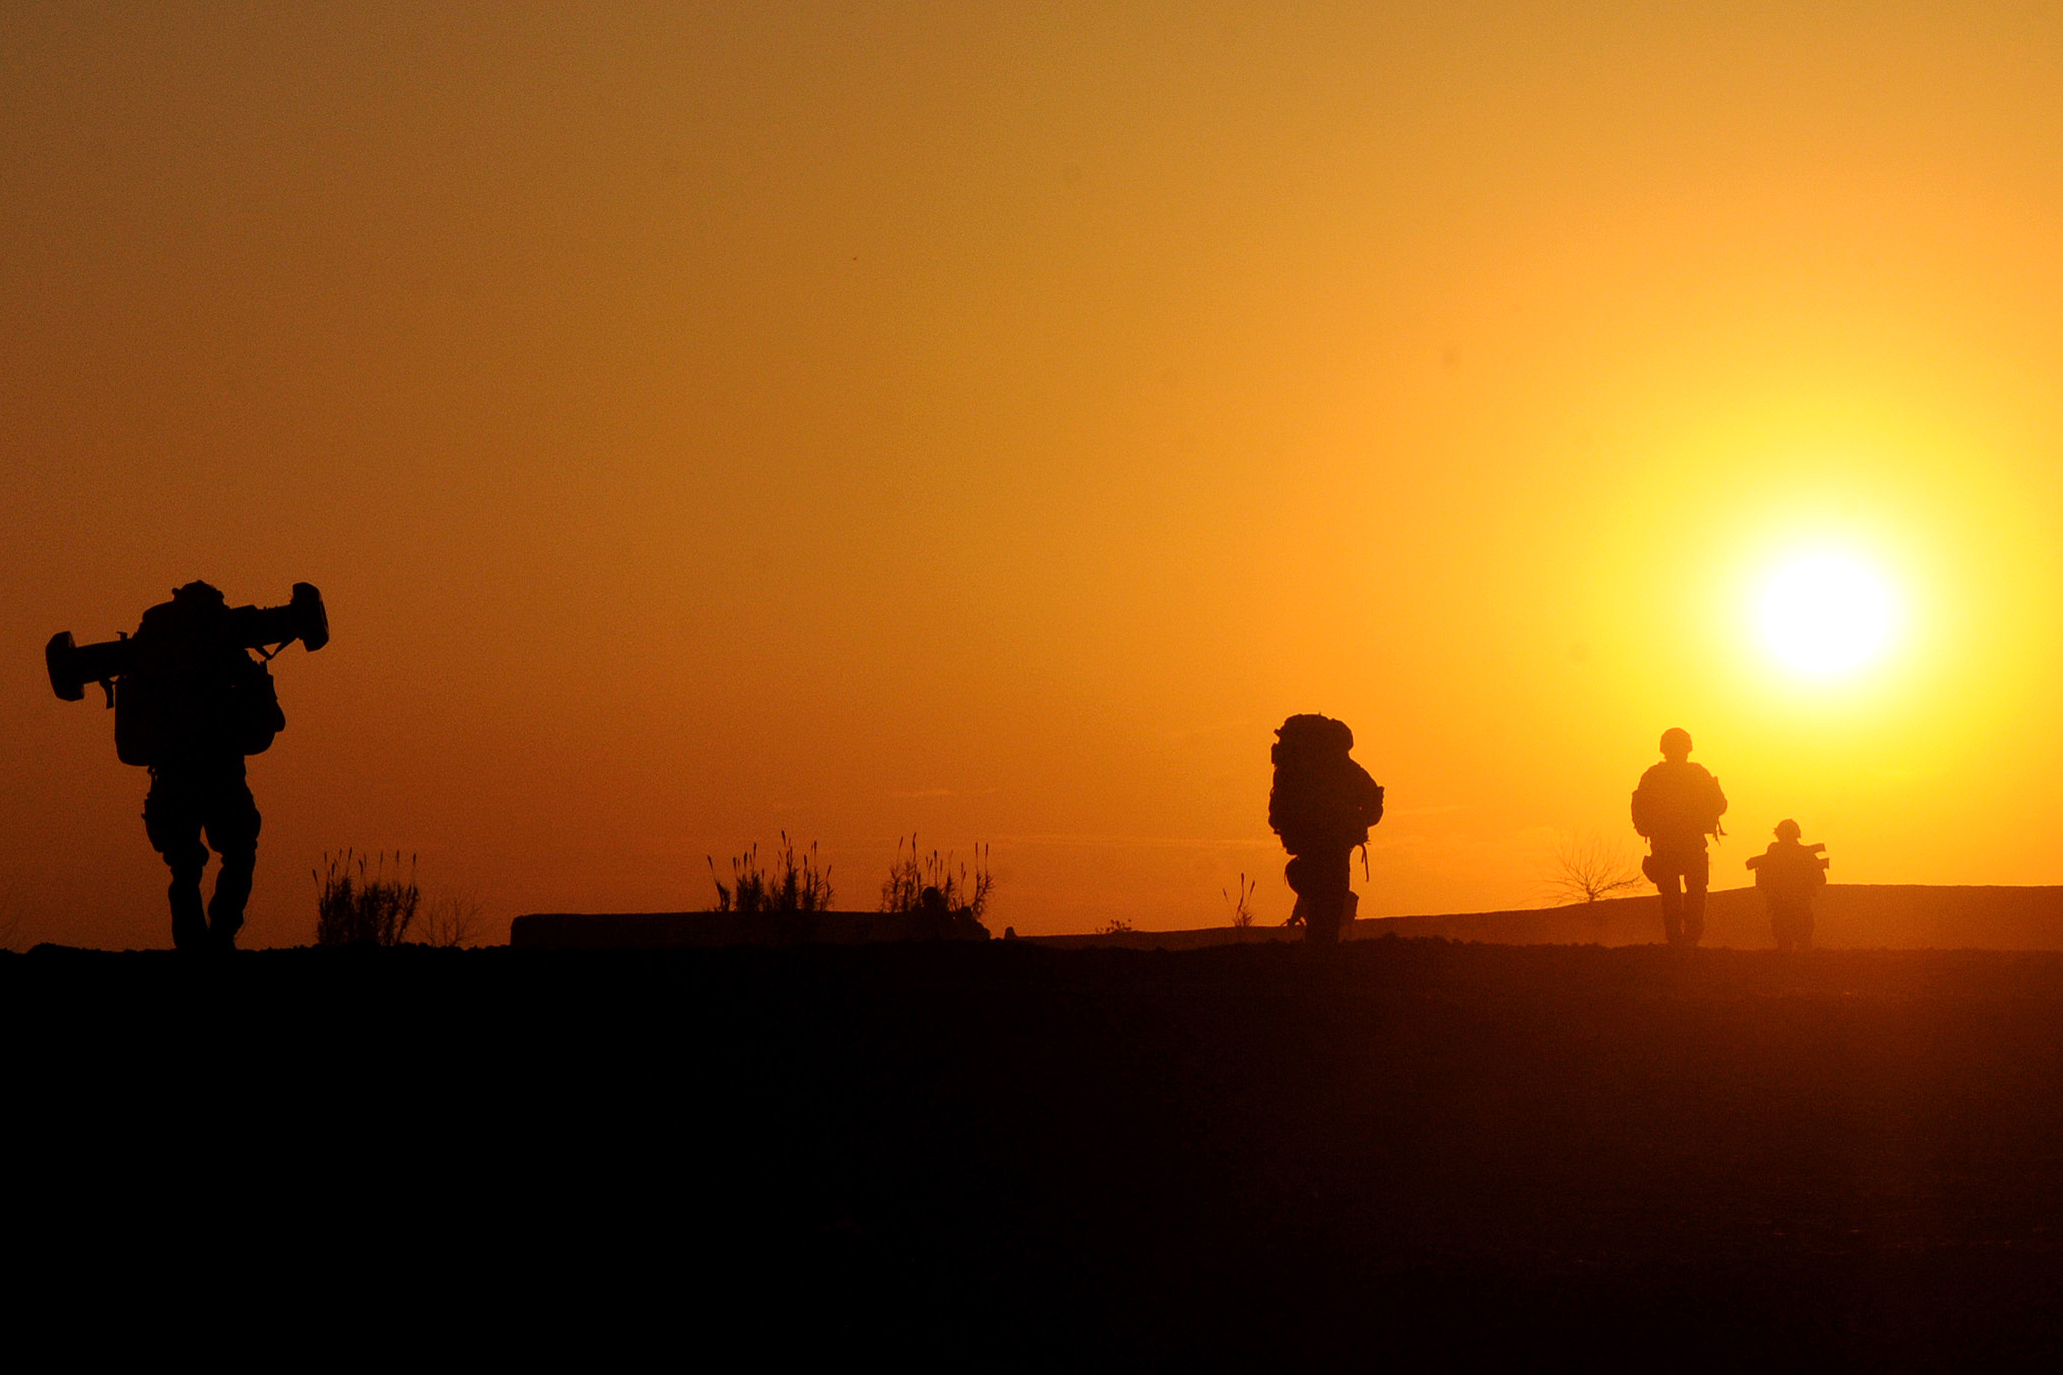 Free, Public Domain Image: Armed Soldiers Walking at Sunset Stock ...